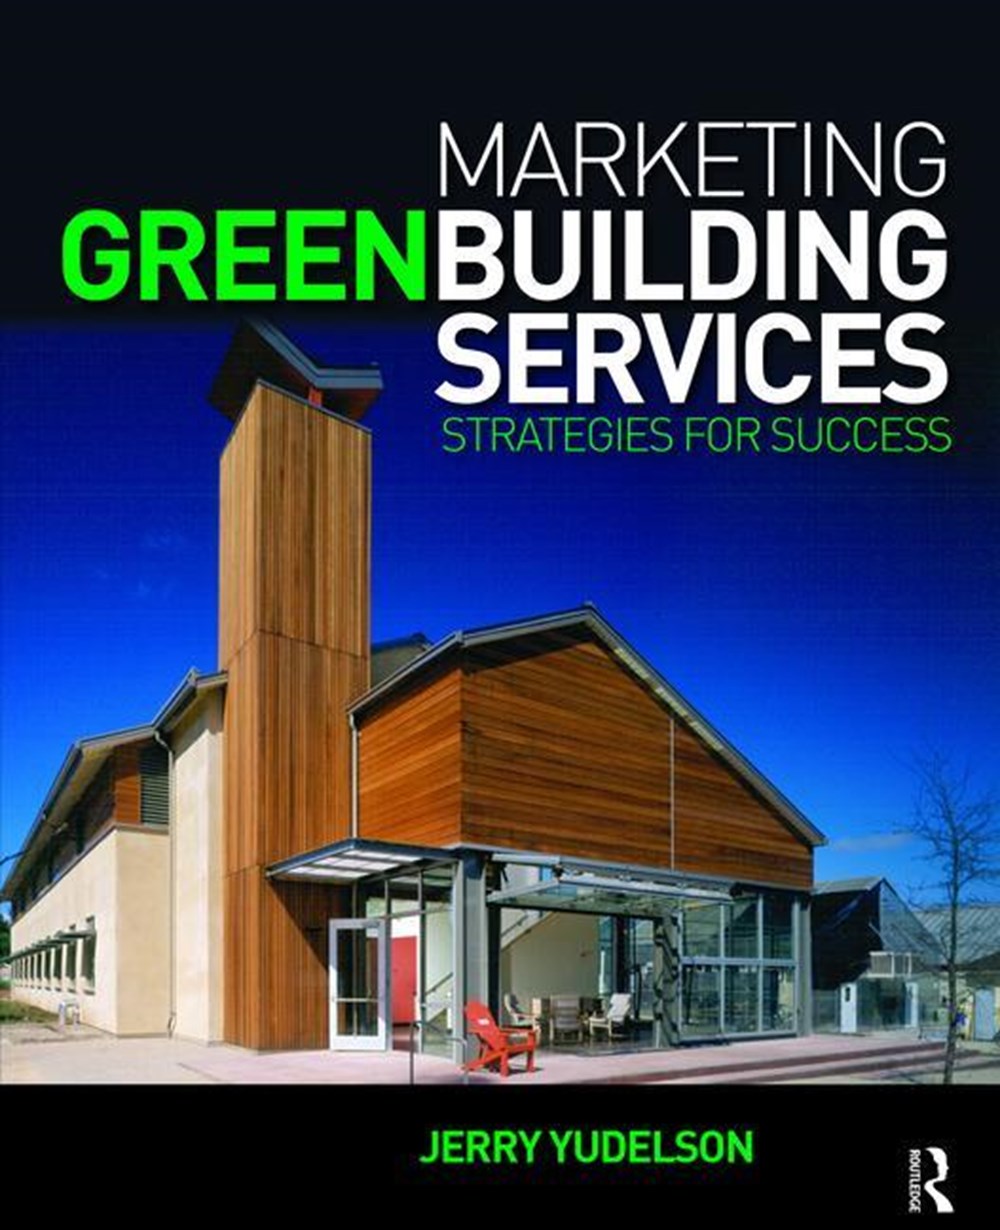 Marketing Green Building Services